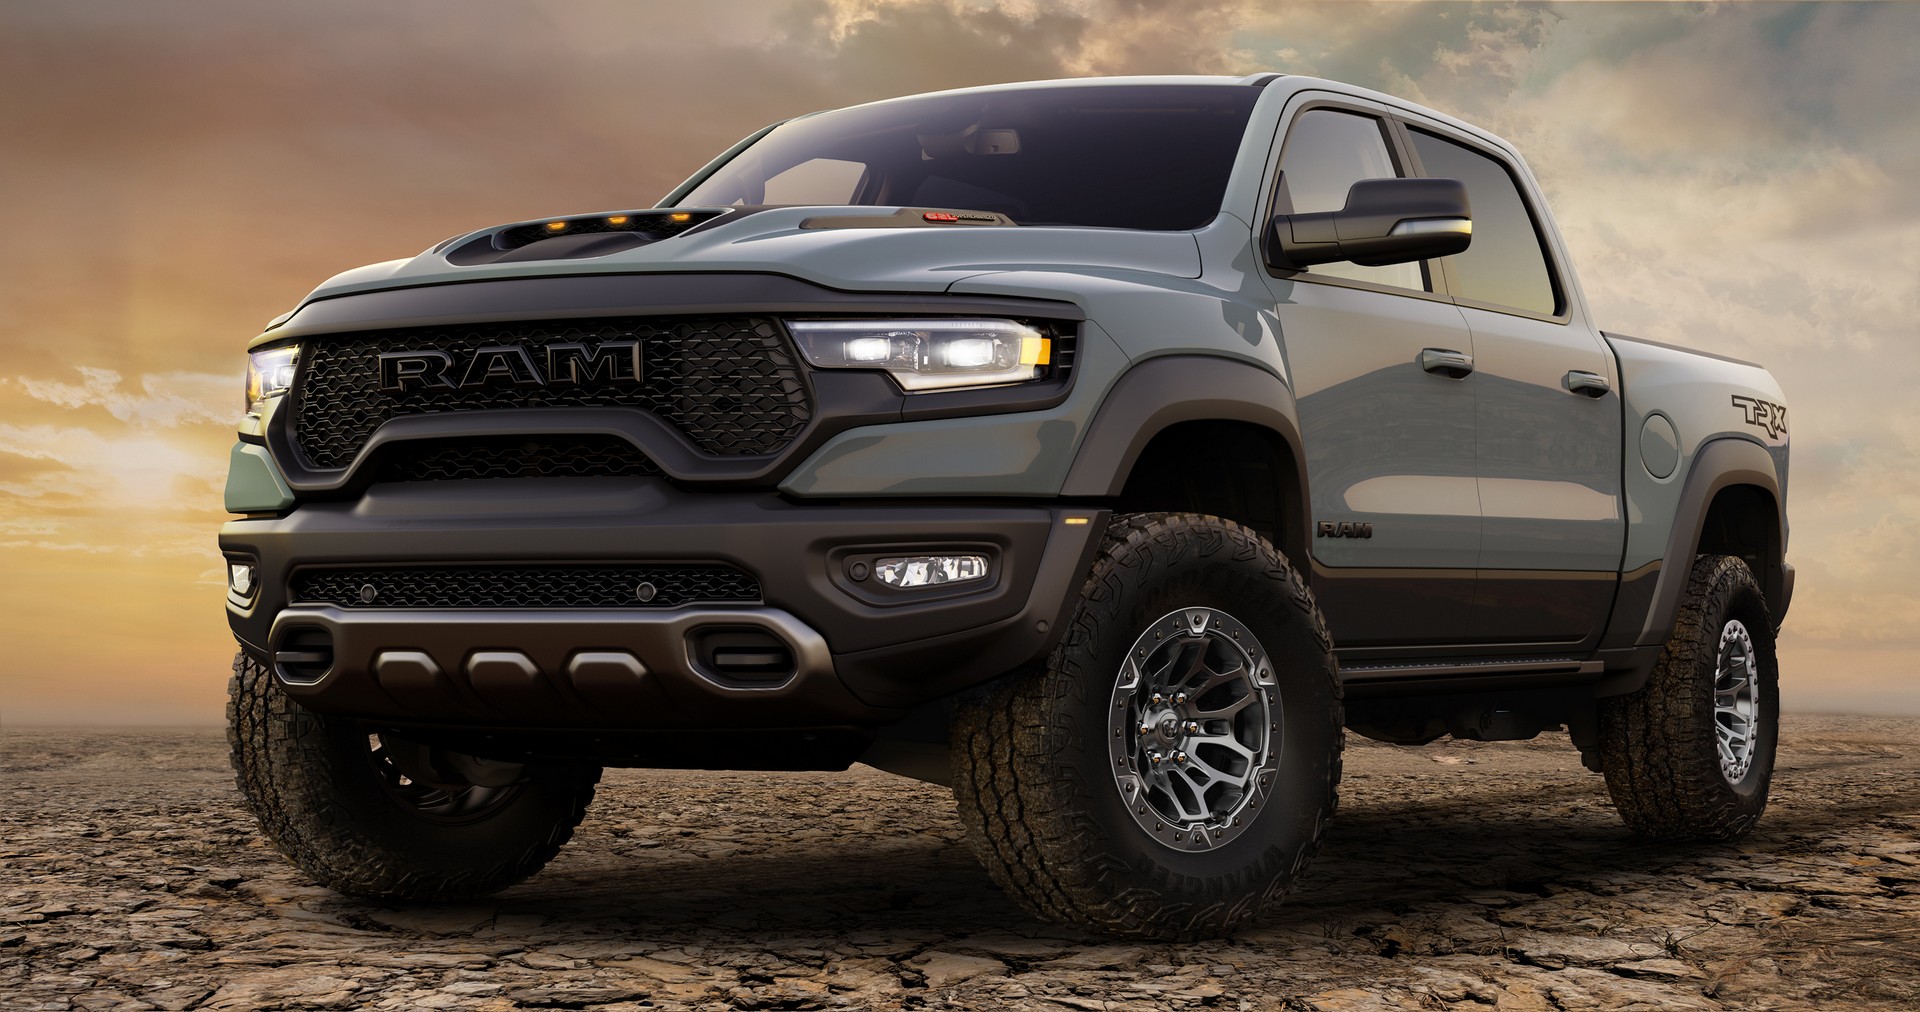 Incubus dessert Egypten How About That? Dodge And Ram Sales In Europe Doubled In September 2020 |  Carscoops